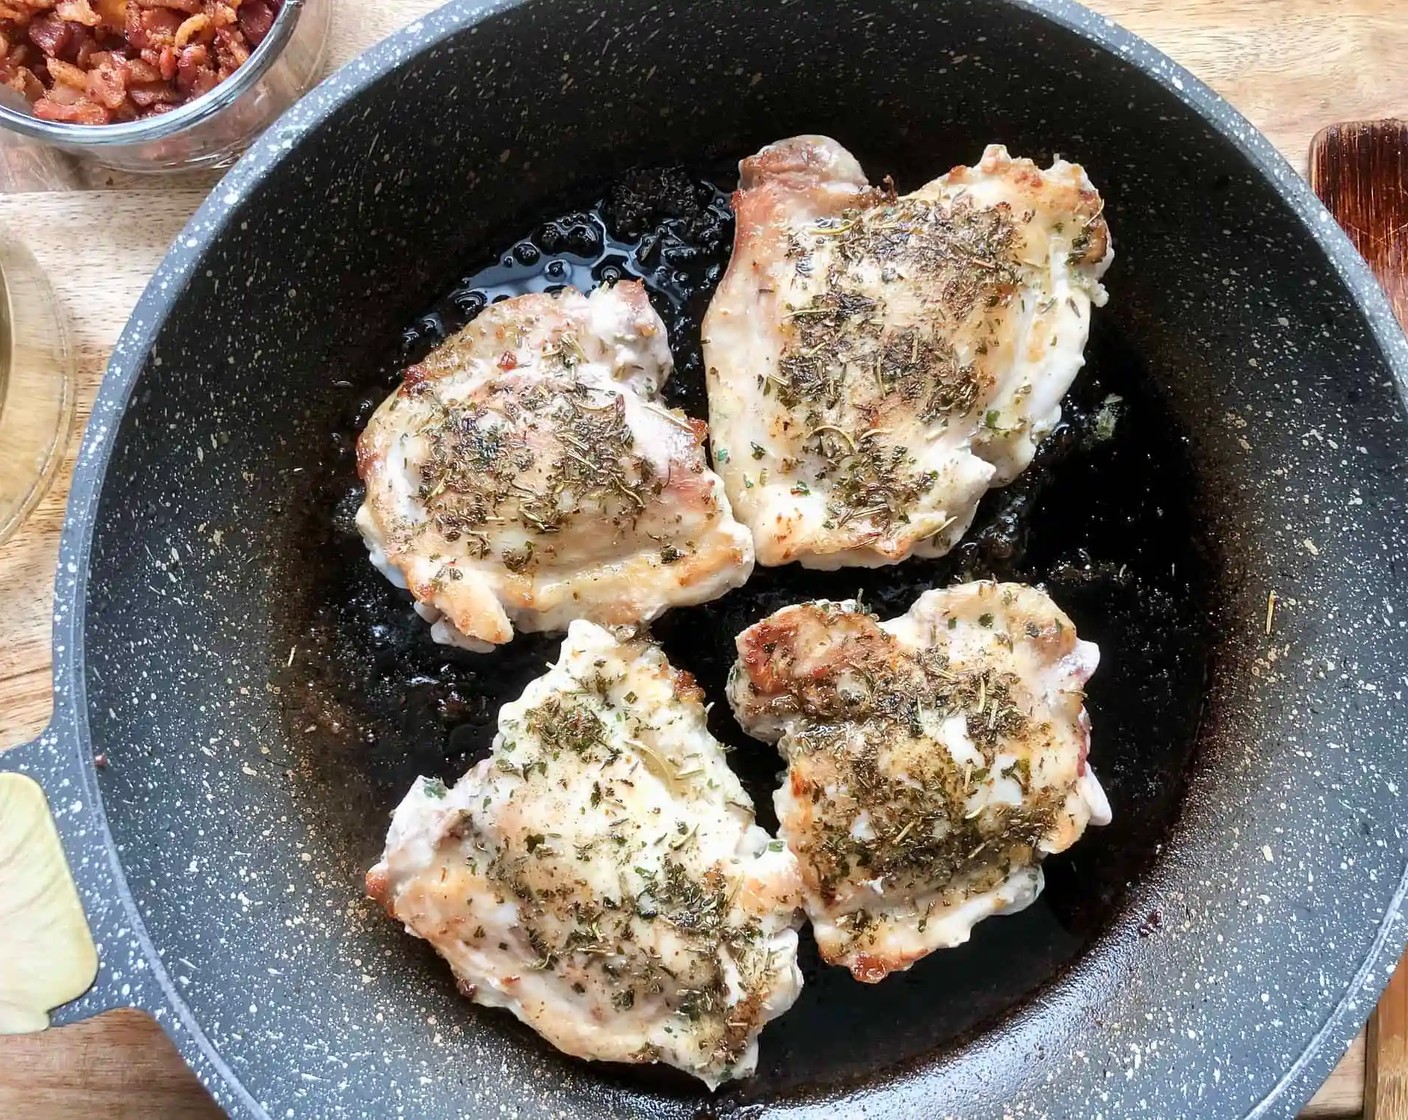 step 2 Sprinkle Bone-In Chicken Thighs (1.5 lb) with the Dried Mixed Herbs (1/2 Tbsp). Add chicken to bacon drippings in pan, cook for about 8 minutes, browning on all sides.